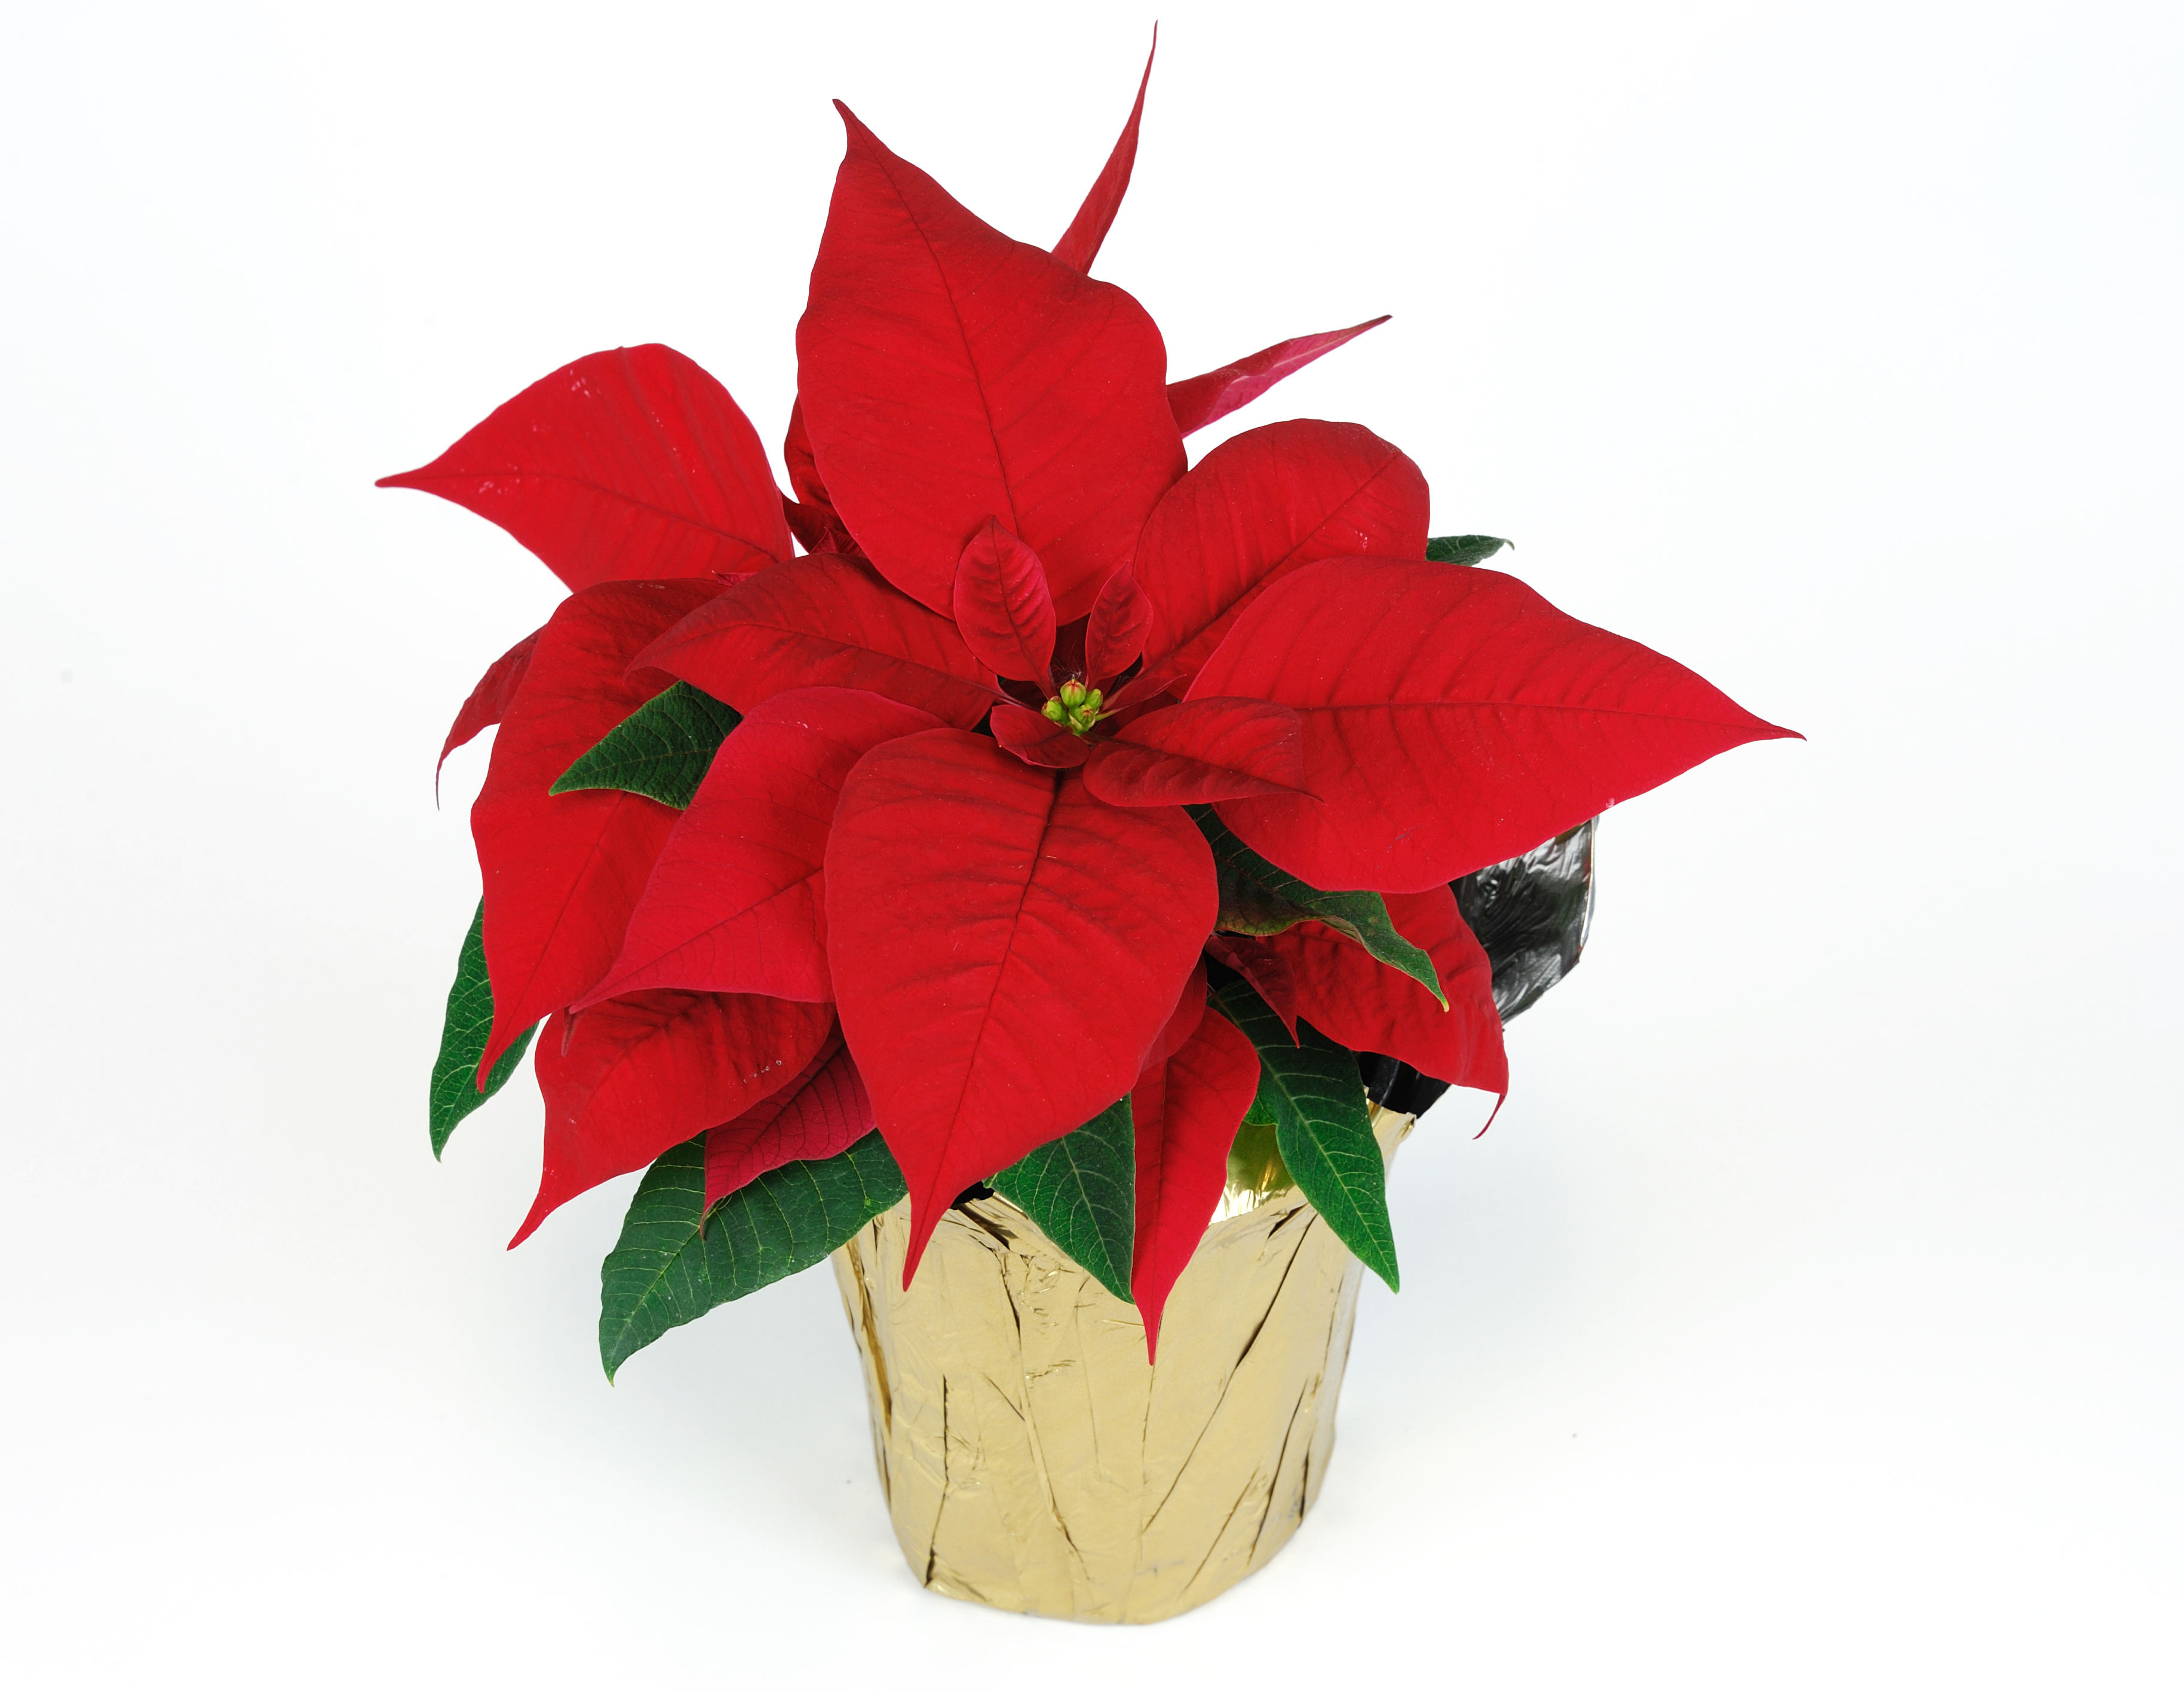 Poinsettia Plant Fun Facts & Care | Wedel's Nursery, Florist and ...